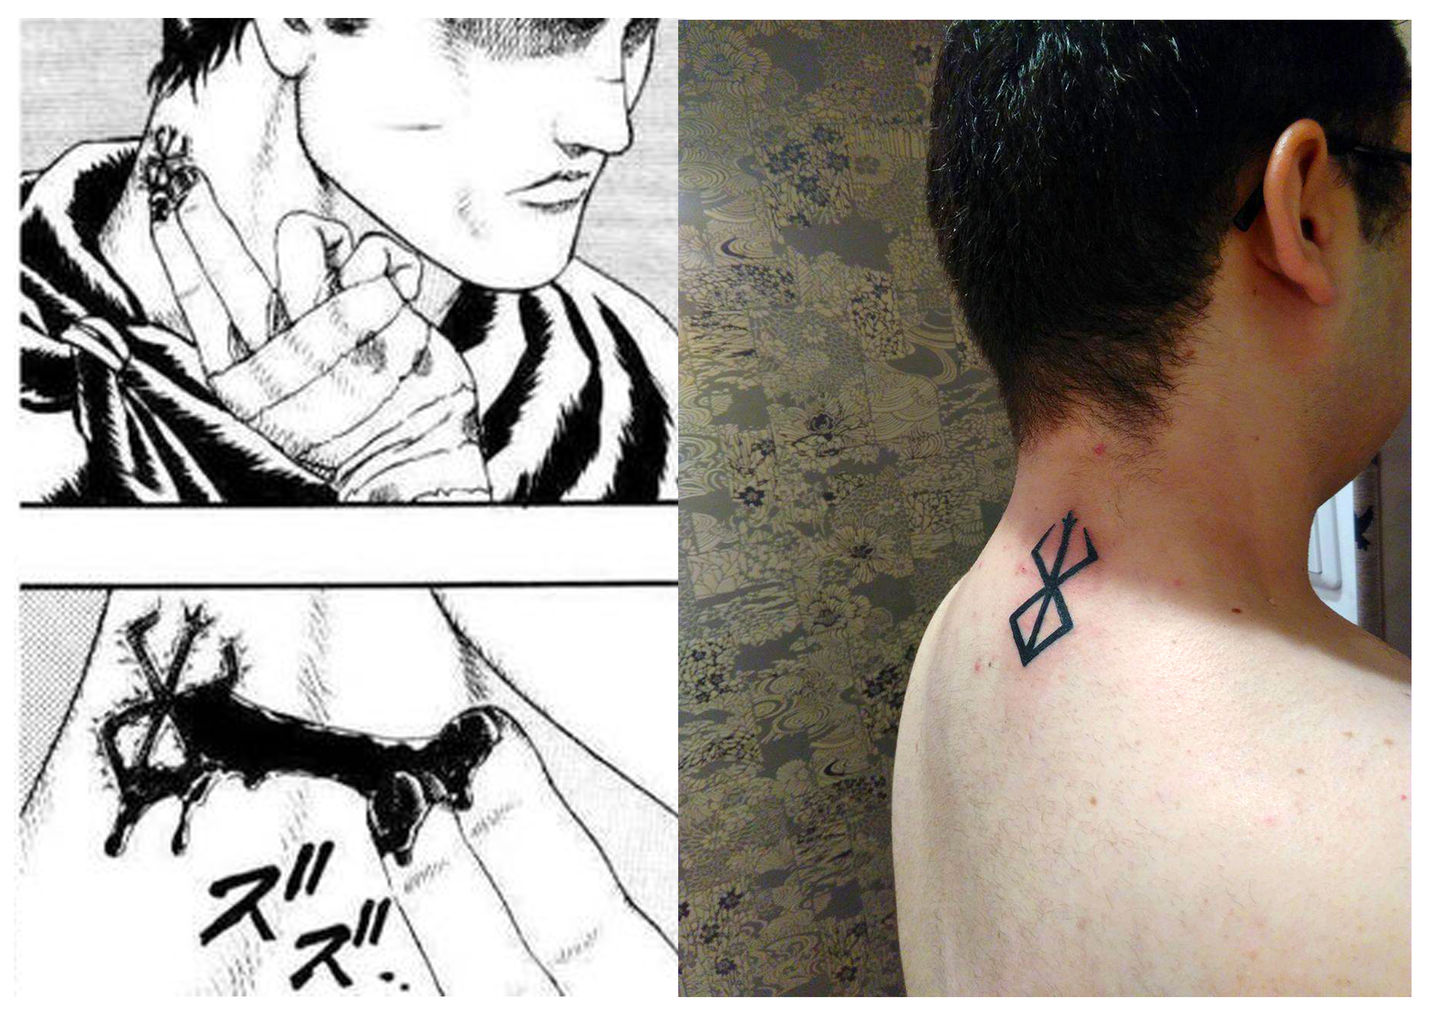 The 15 Best Anime Tattoo Ideas  Designs Fans Should Try